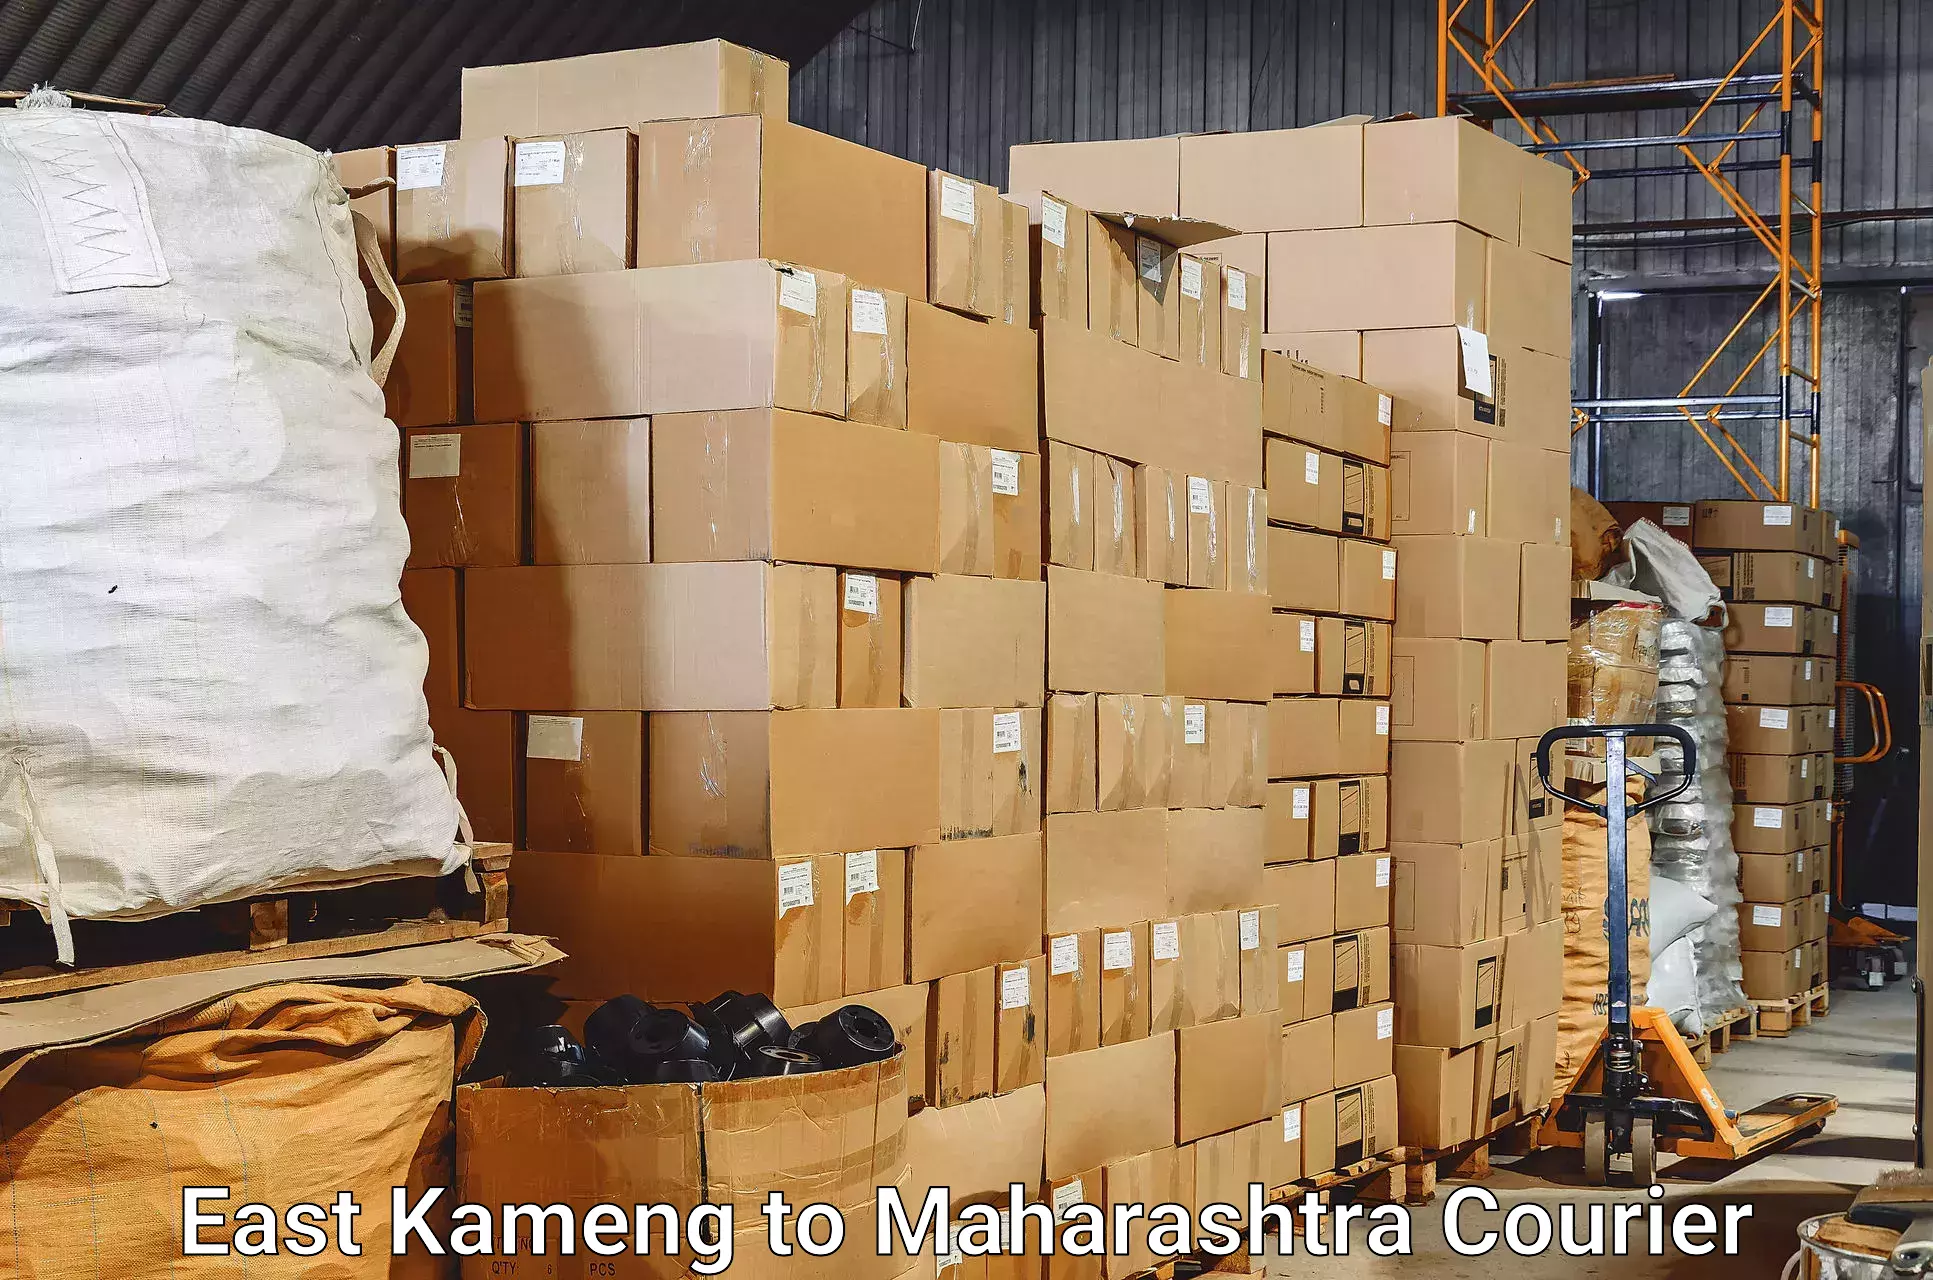 Baggage shipping schedule East Kameng to Lonavala